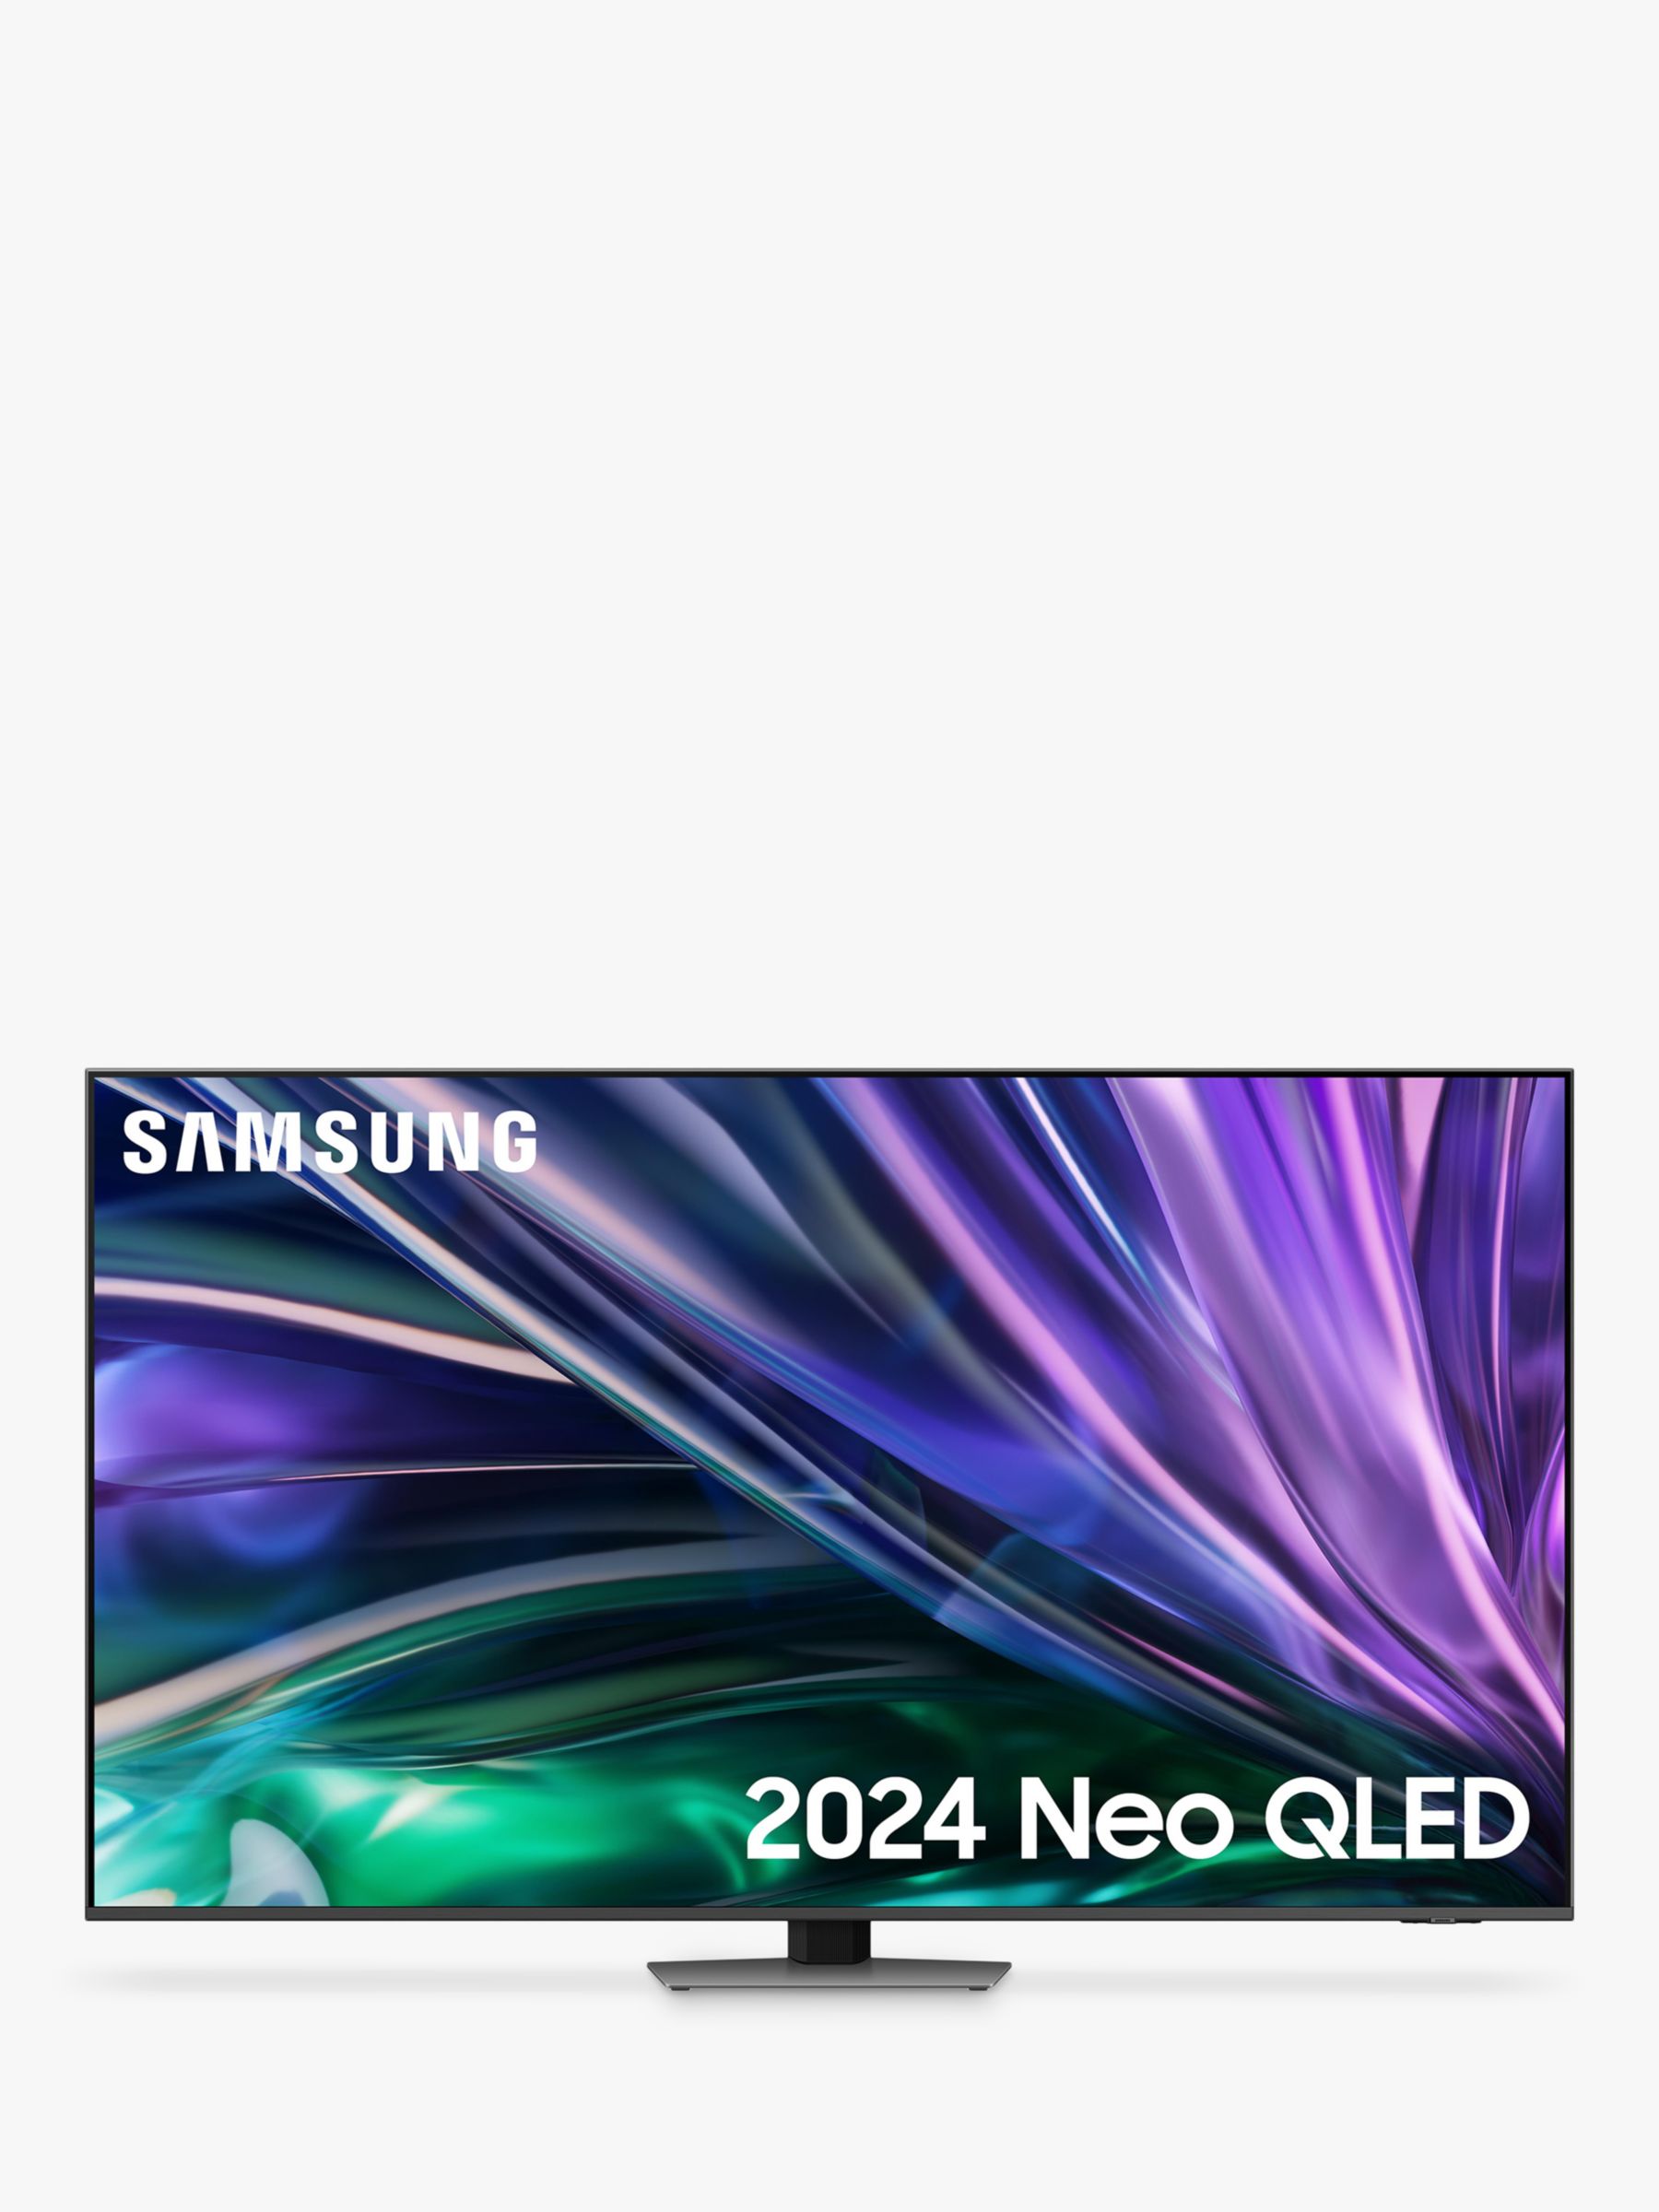 Samsung QE75QN85D (2024) Neo QLED HDR 4K Ultra HD Smart TV, 75 inch with TVPlus & Dolby Atmos, Carbon Silver